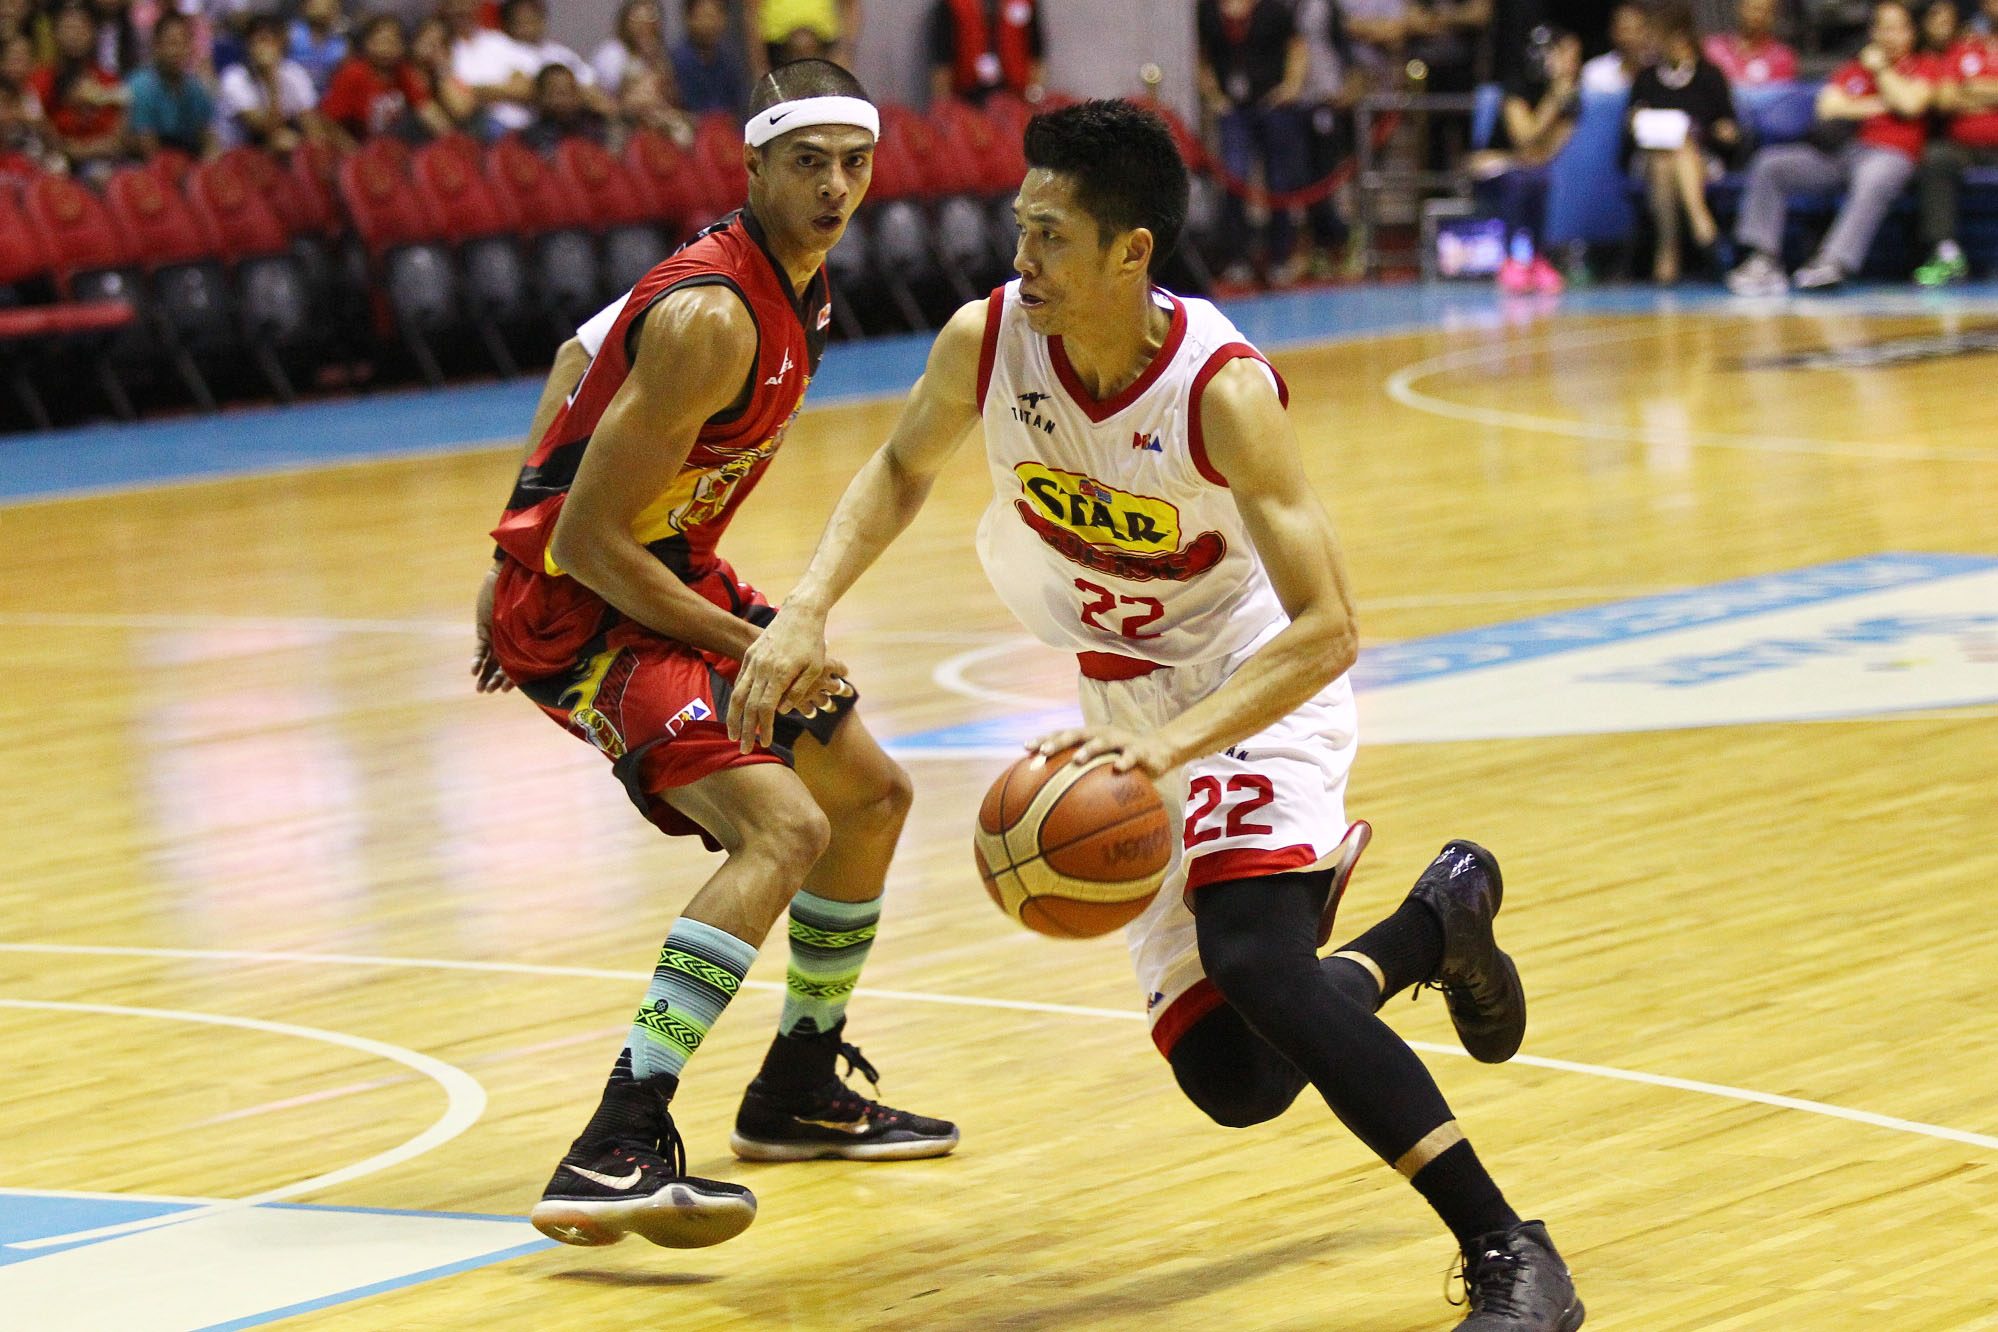 Star goes on late surge to survive San Miguel, extend quarterfinals